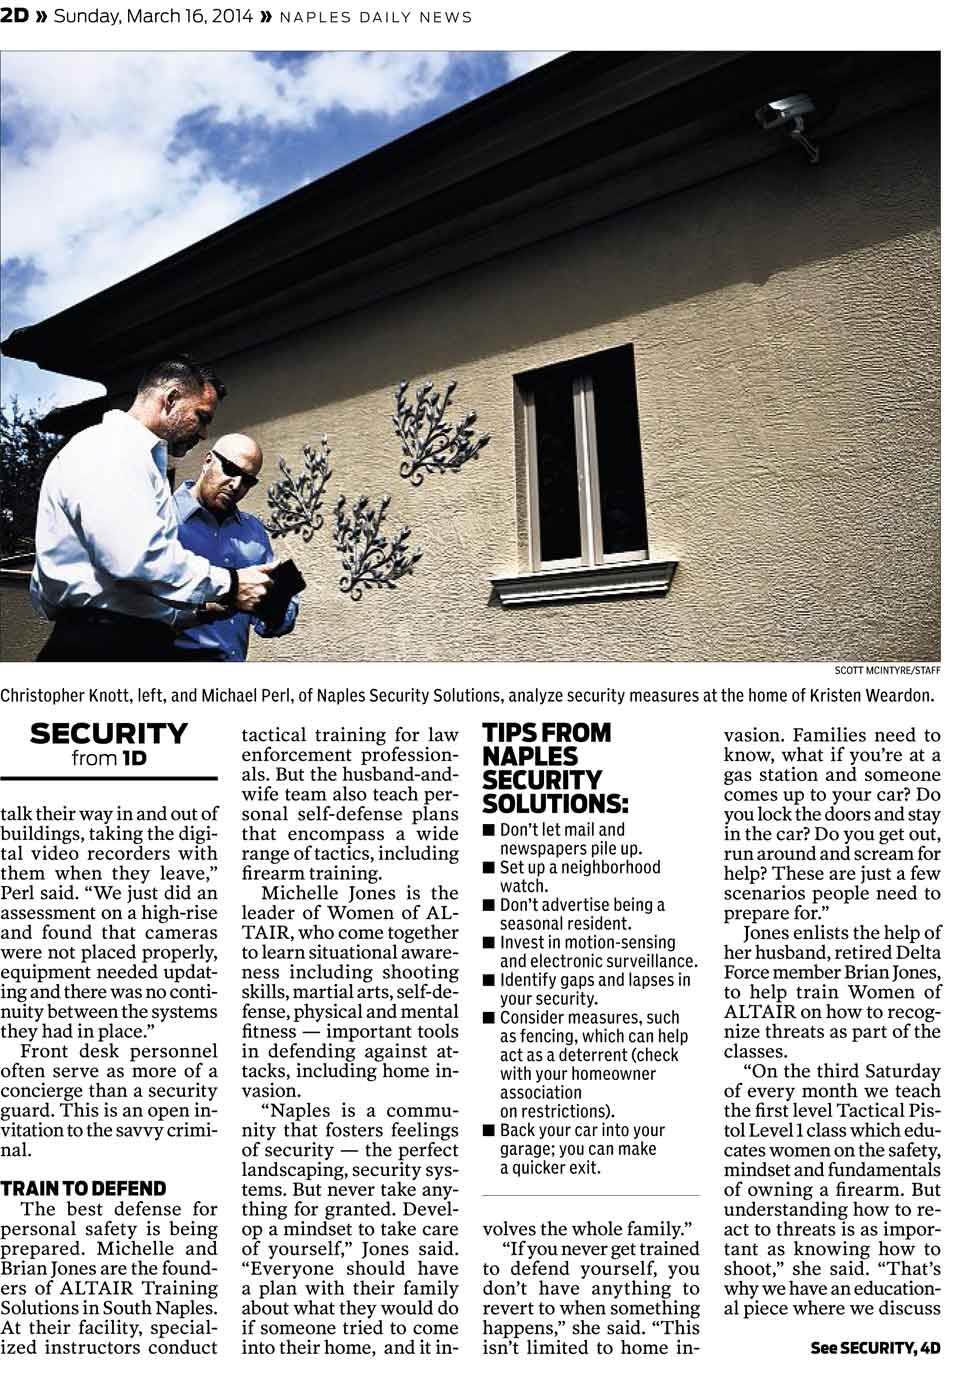 Naples Security Solutions in Naples Daily News